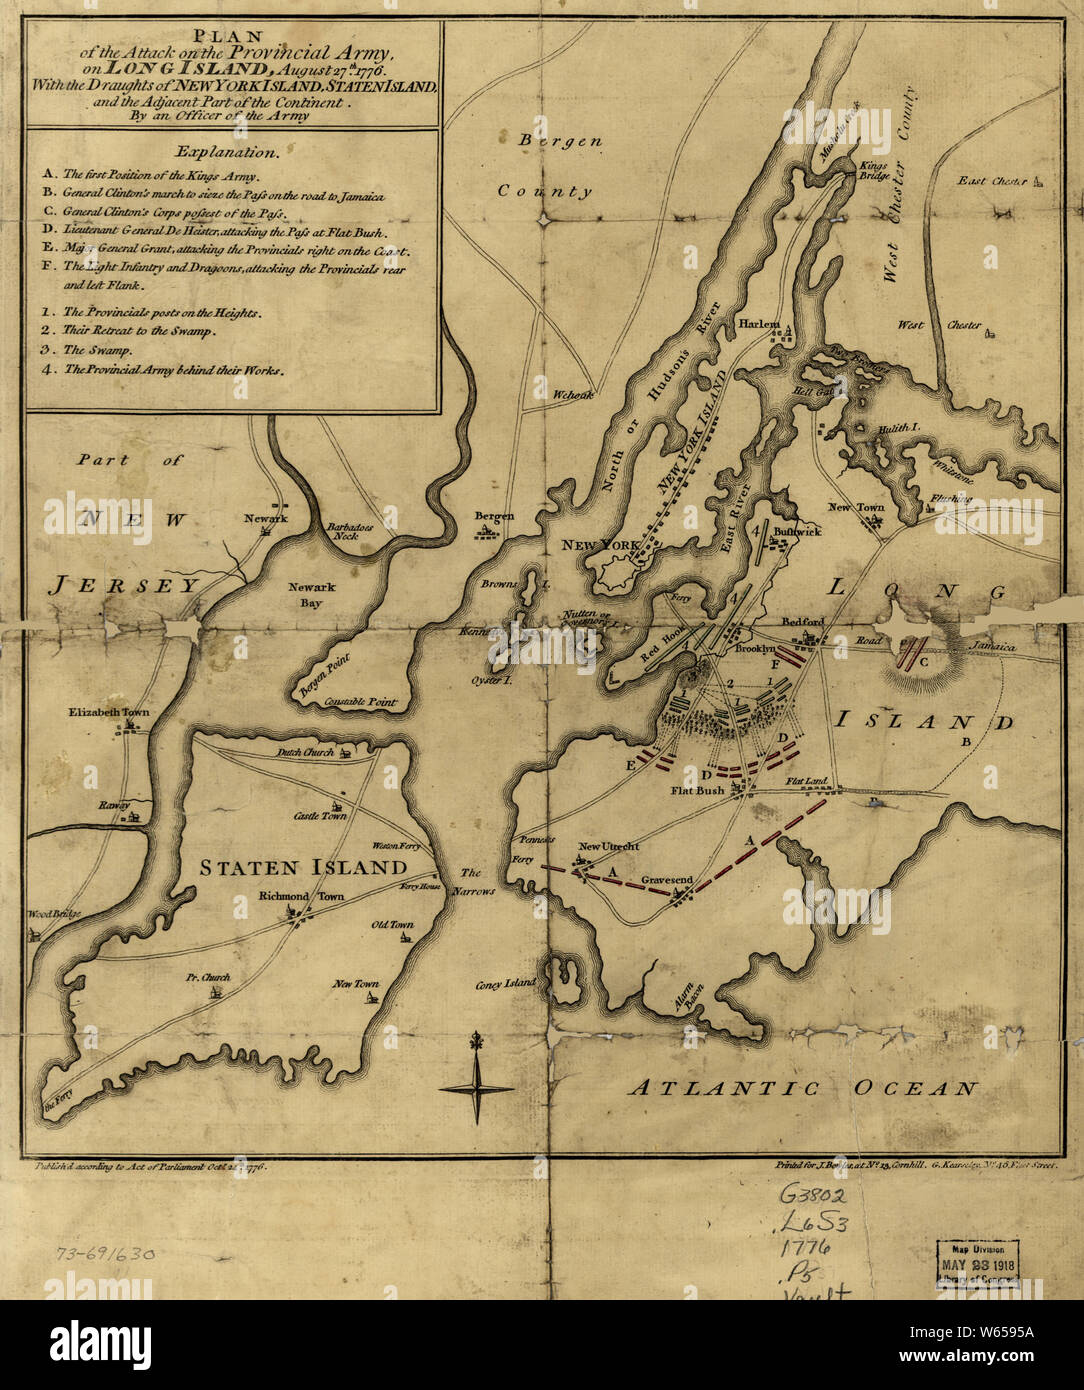 American Revolutionary War Era Maps 1750-1786 765 Plan of the attack on the provincial army on Long Island August 27th 1776 With the draughts of New York Rebuild and Repair Stock Photo